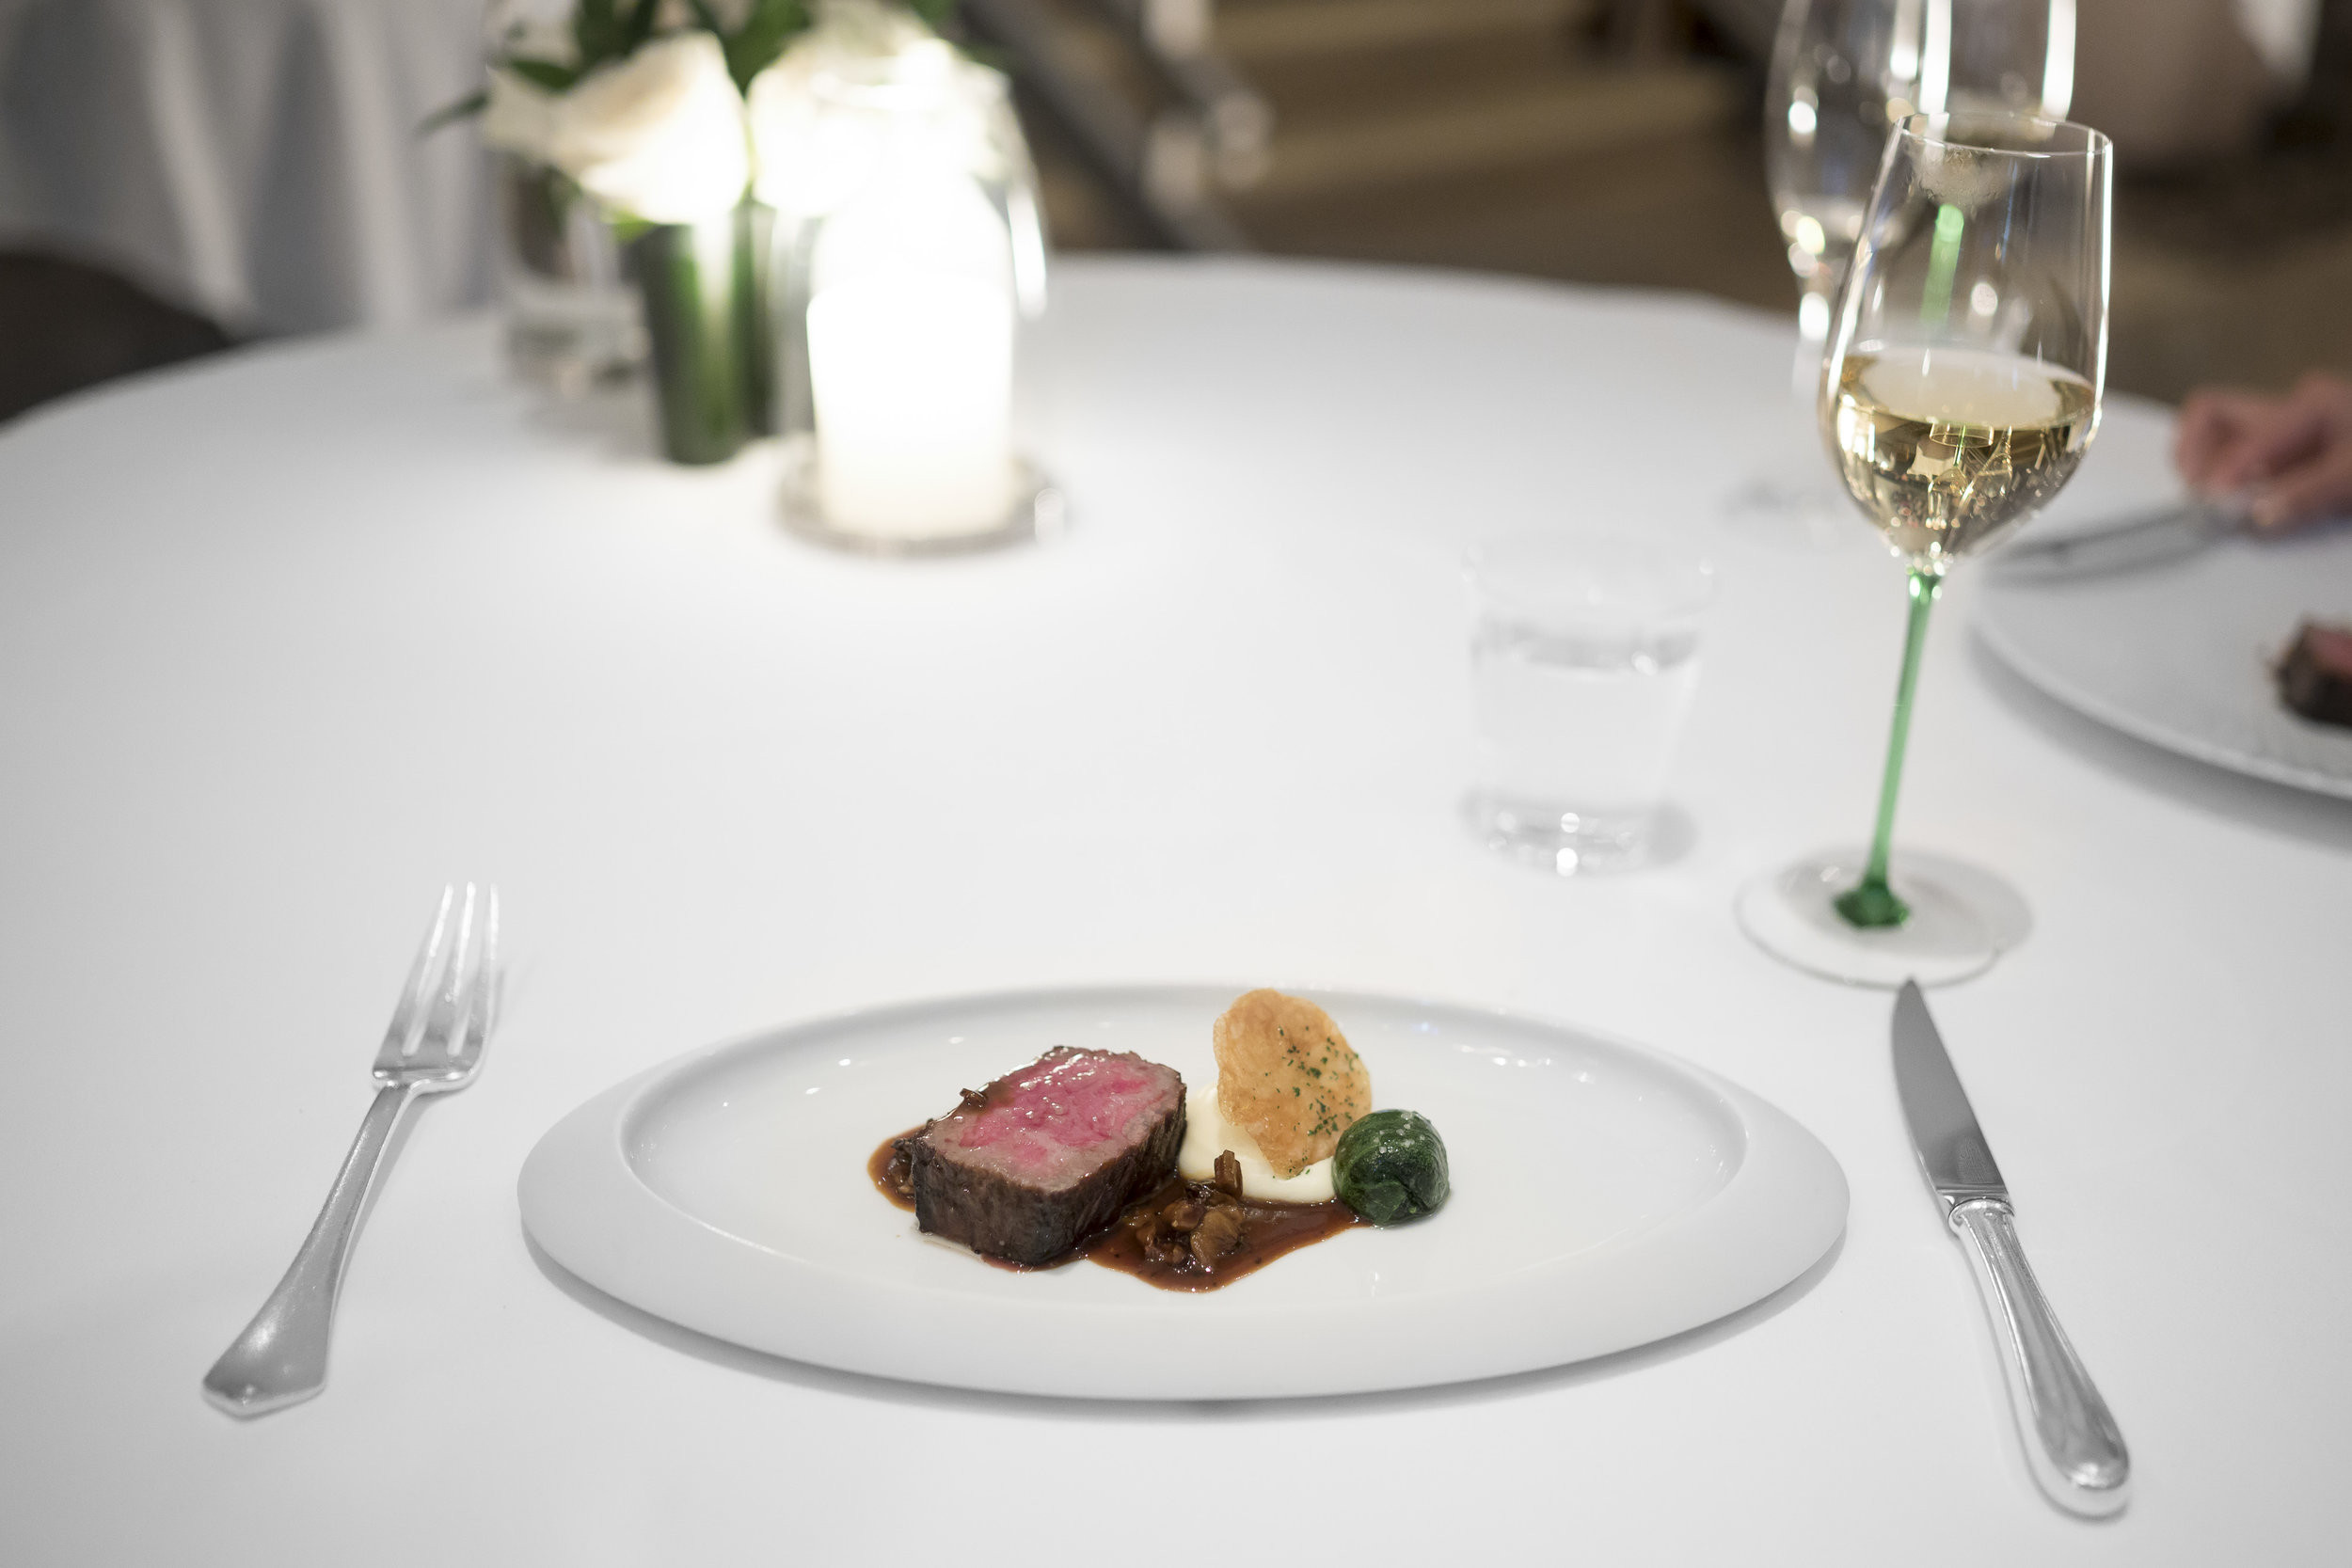 Charcoal-grilled Miyazaki Wagyu. "Ris de Veau," Wilted Spinach, "Pommes Maxim's," and Wild Mushroom-Madeira Cream.